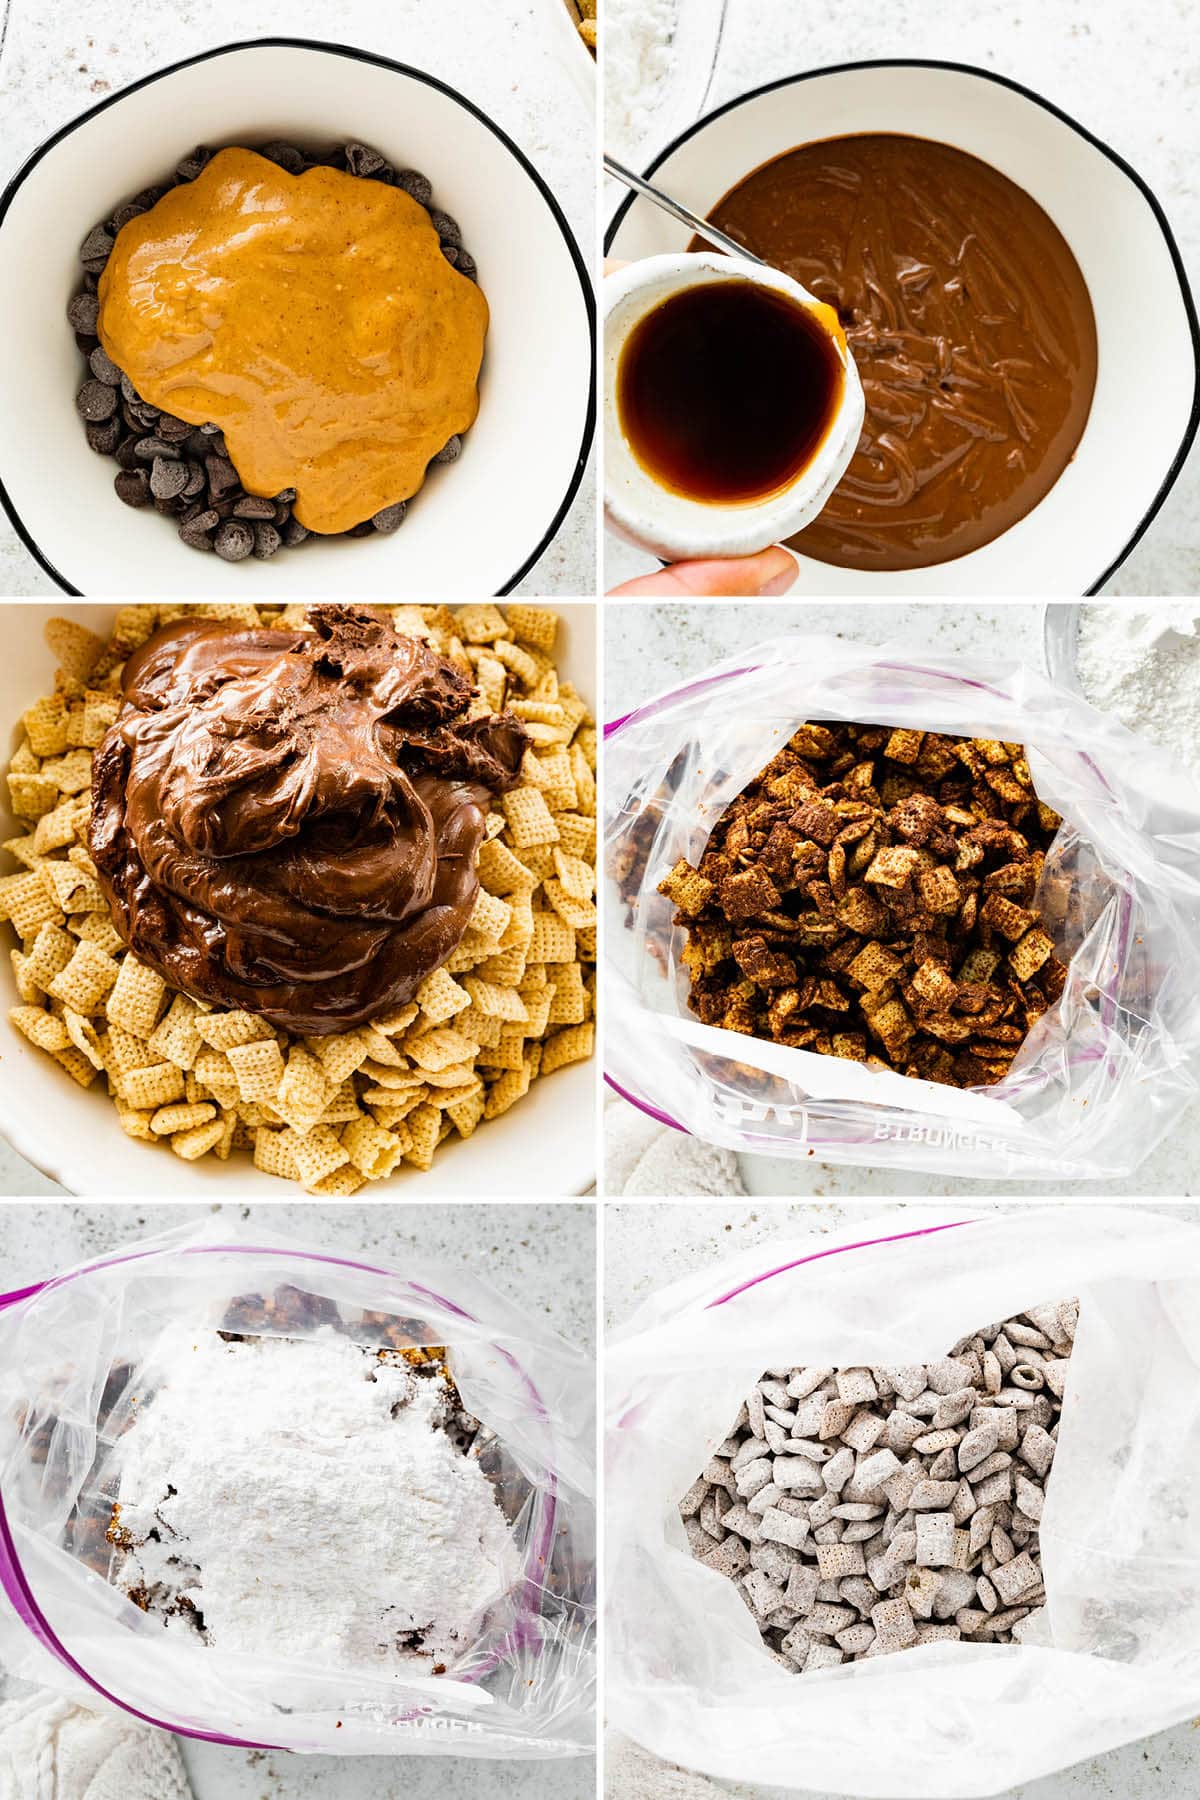 Six photos showing the steps to make Puppy Chow: melting peanut butter and chocolate, stirring in vanilla, tossing the melted chocolate mixture with Chex, and then tossing with powdered sugar in a bag.